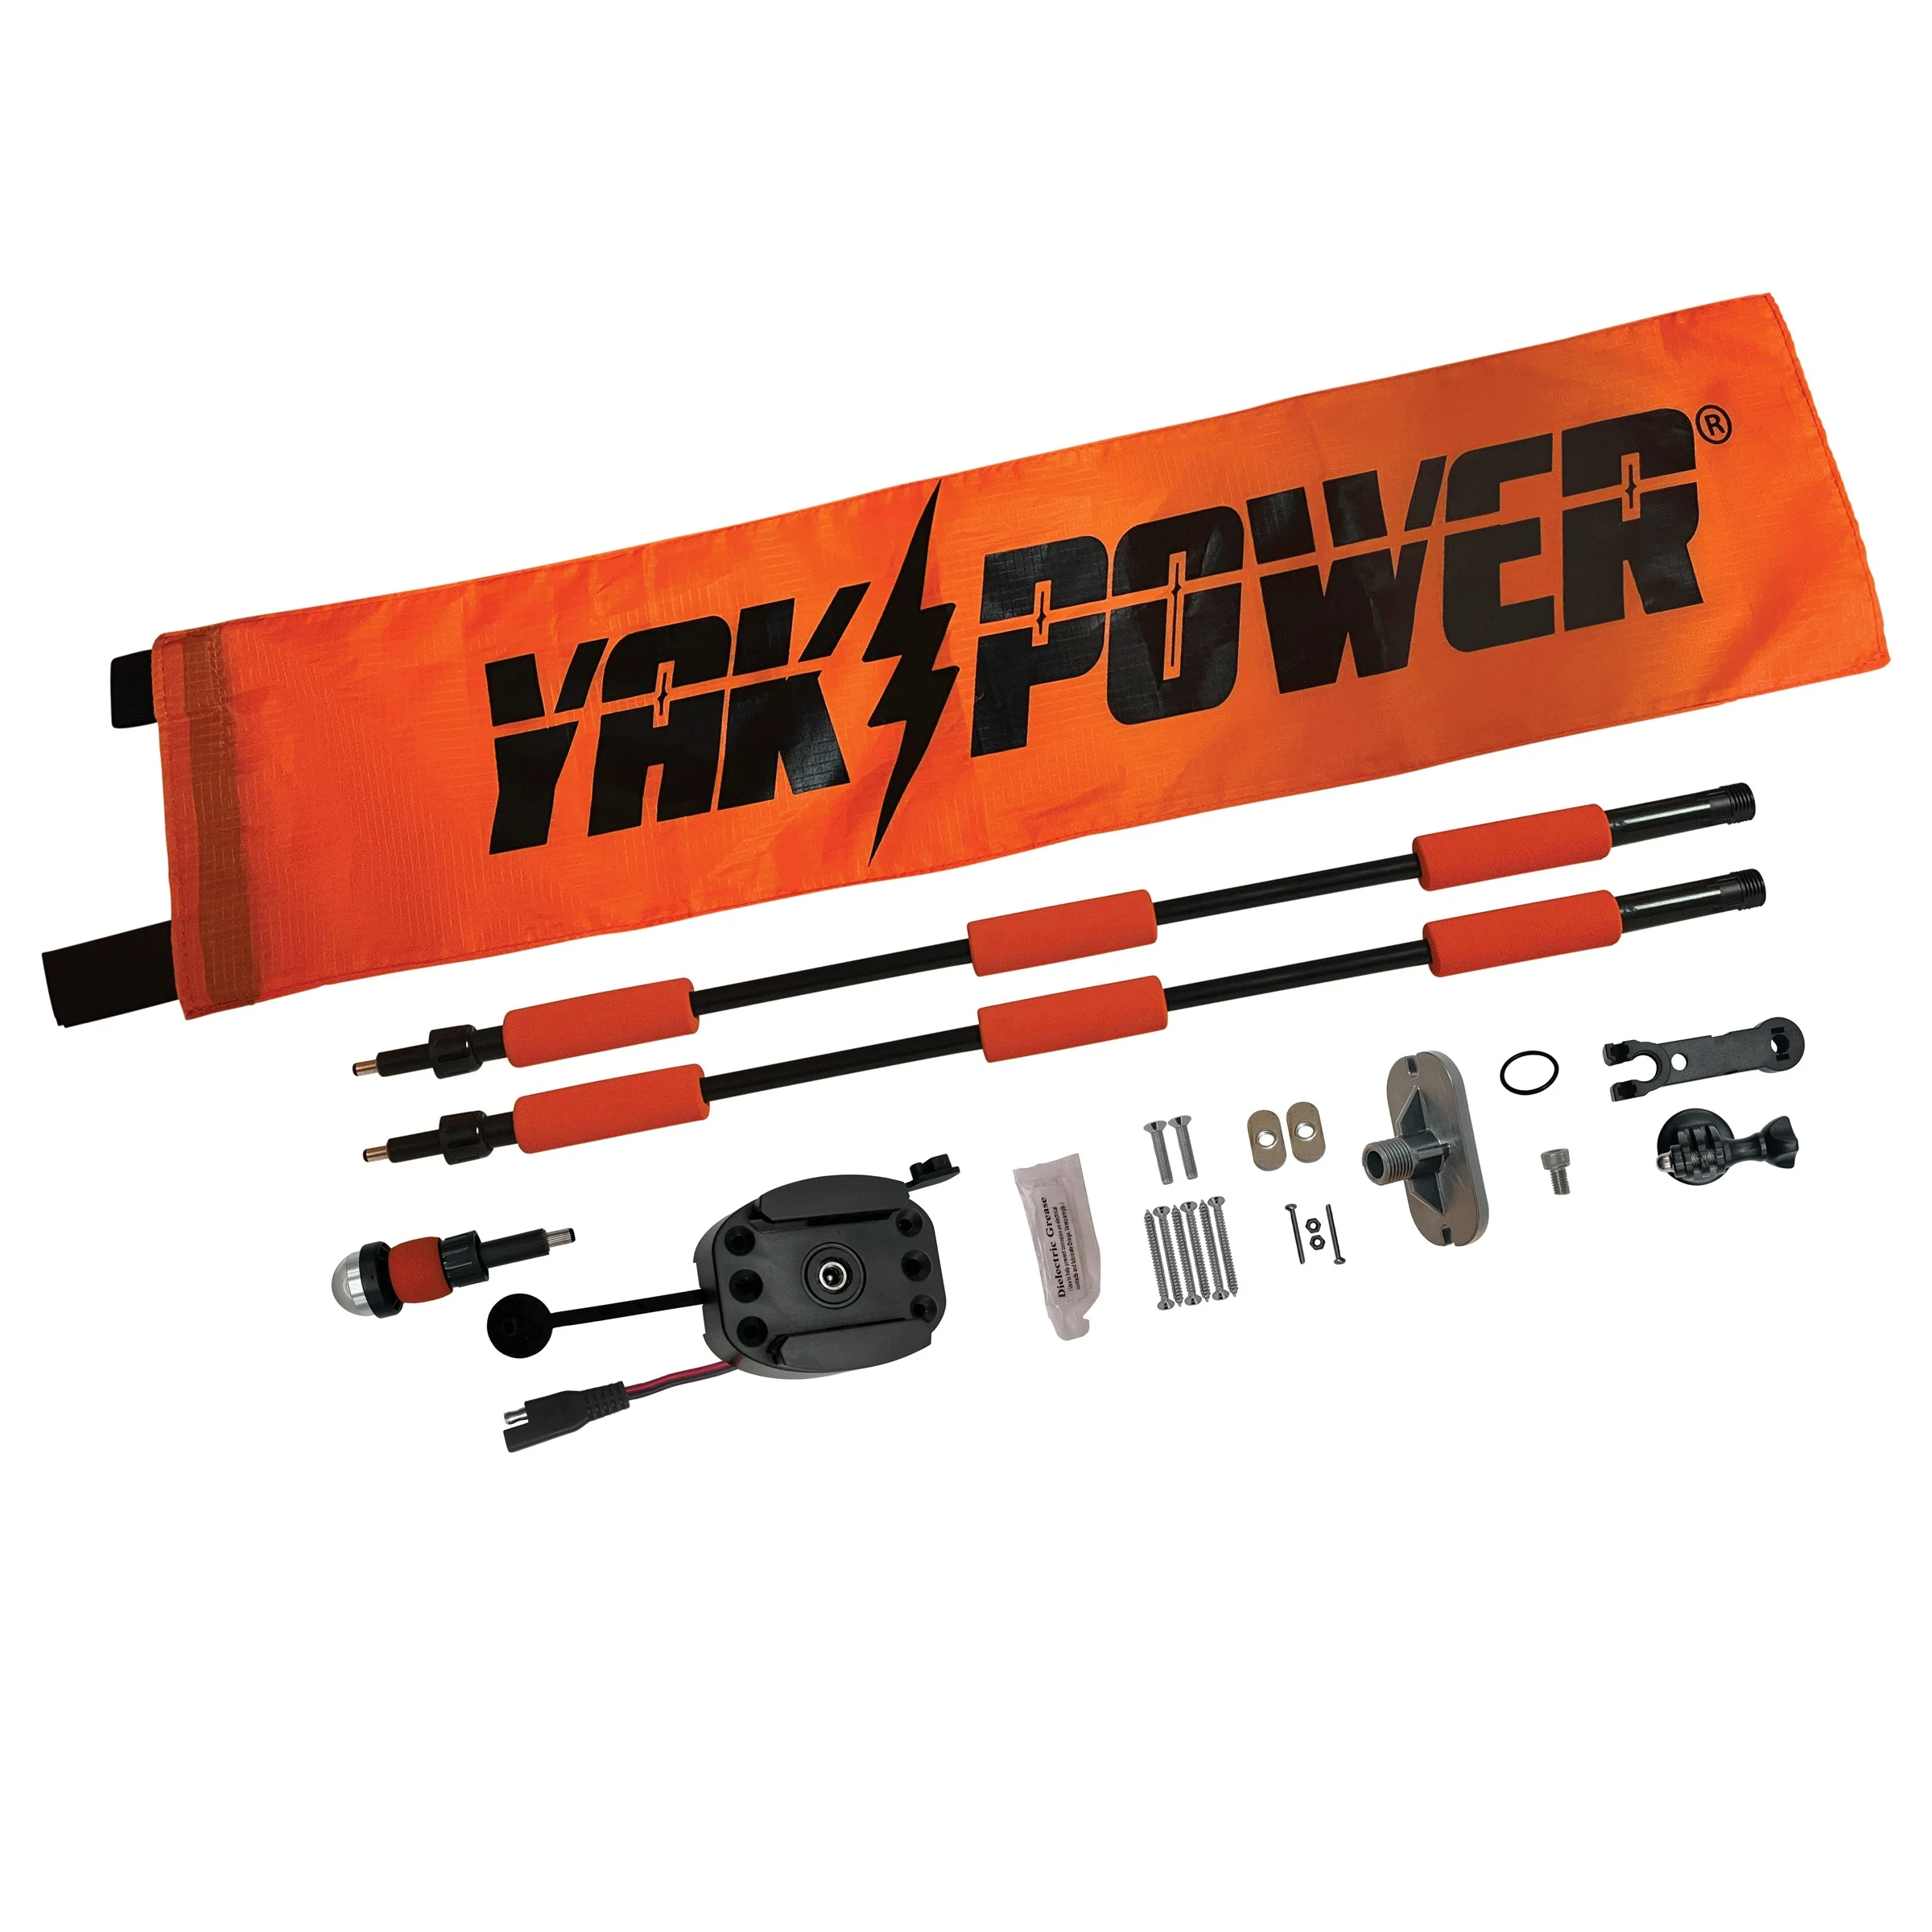 YP-LR360-PRO Lightning Rod - NEW & IMPROVED Threaded Power Connectors - Extendable Powered 360 Degree Safety Light, Flag, and Optional Accessory Mount Questions & Answers